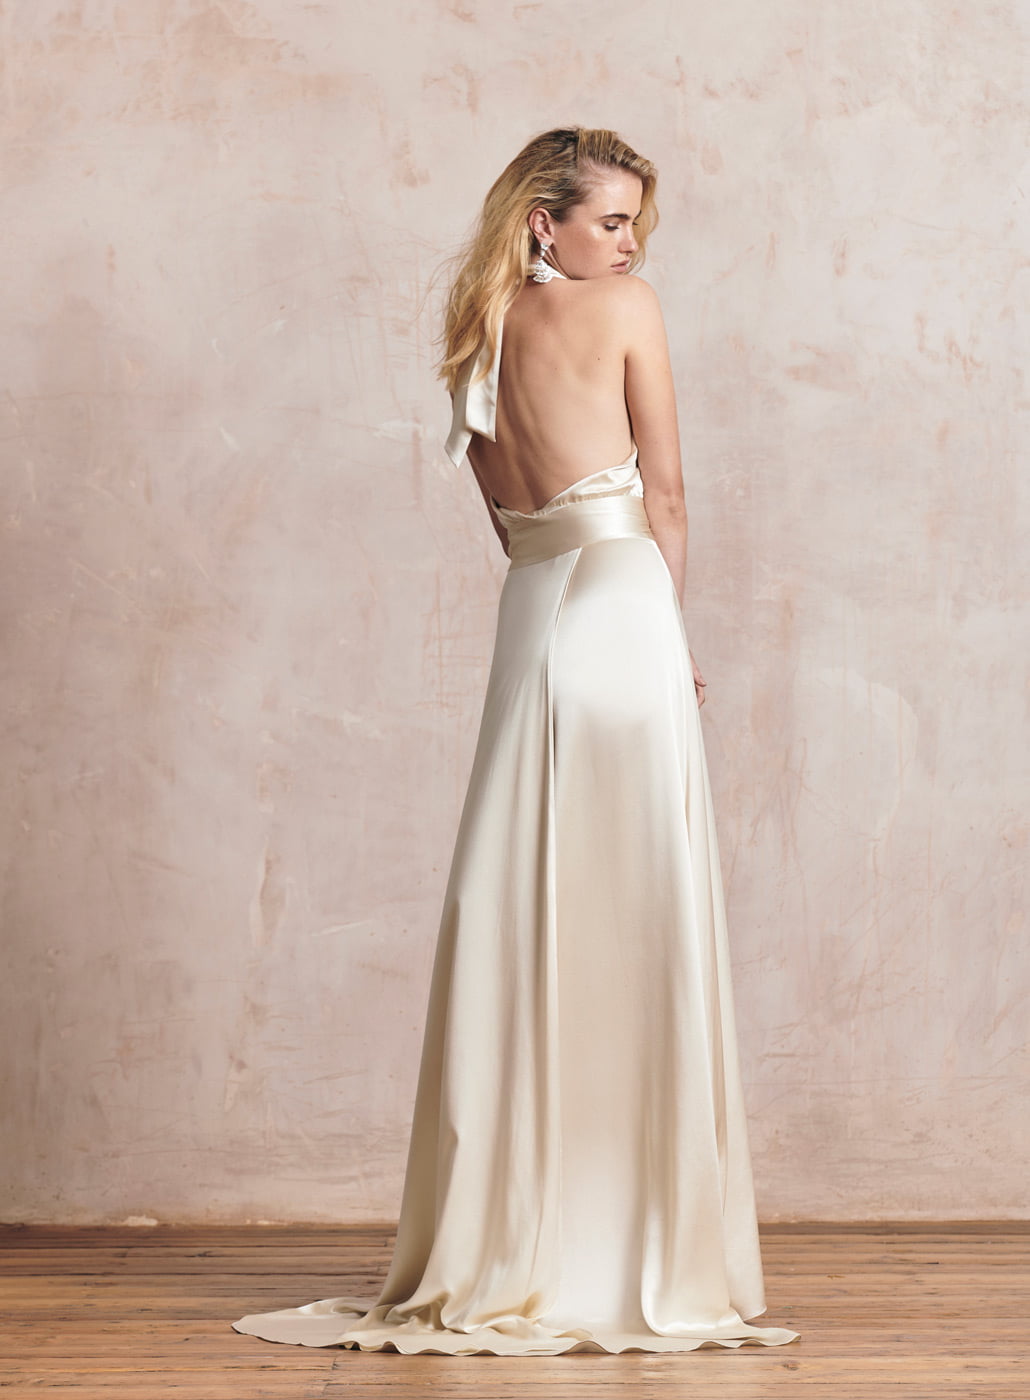 Wedding Dresses and Bridal Gowns